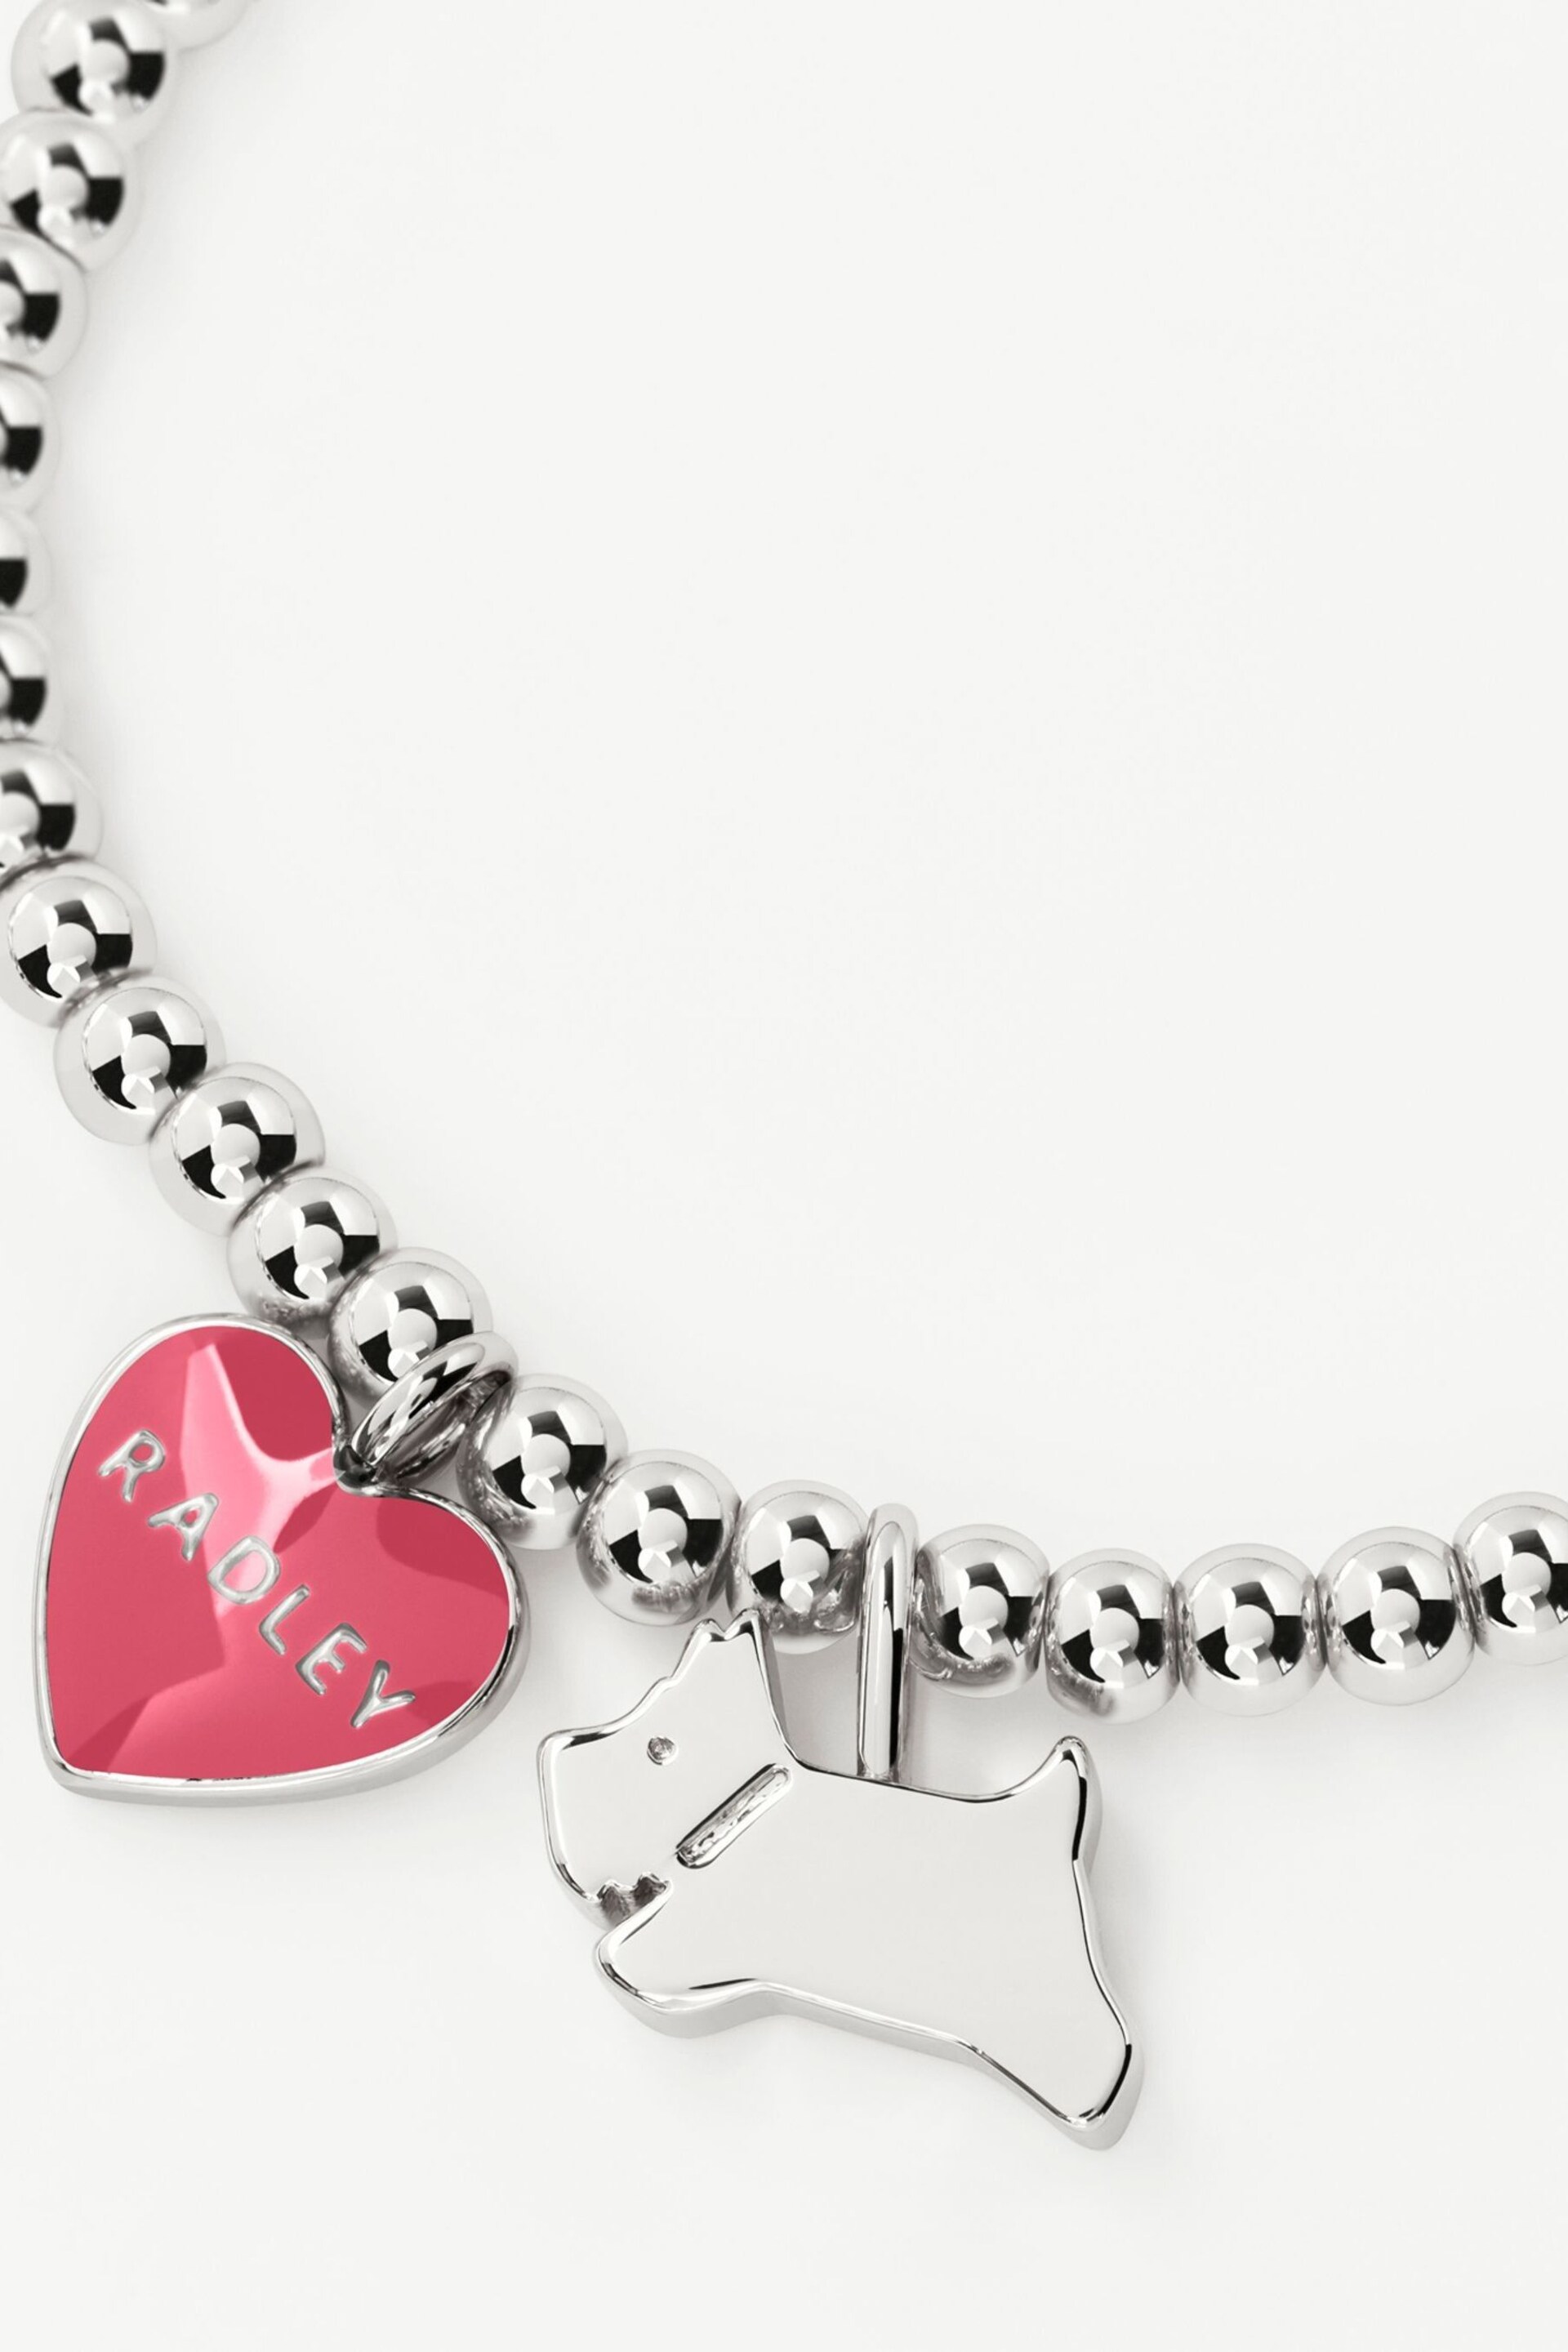 Radley Silver Plated Friendship Bracelet with Jumping Dog and Pink Enamel Heart - Image 3 of 4